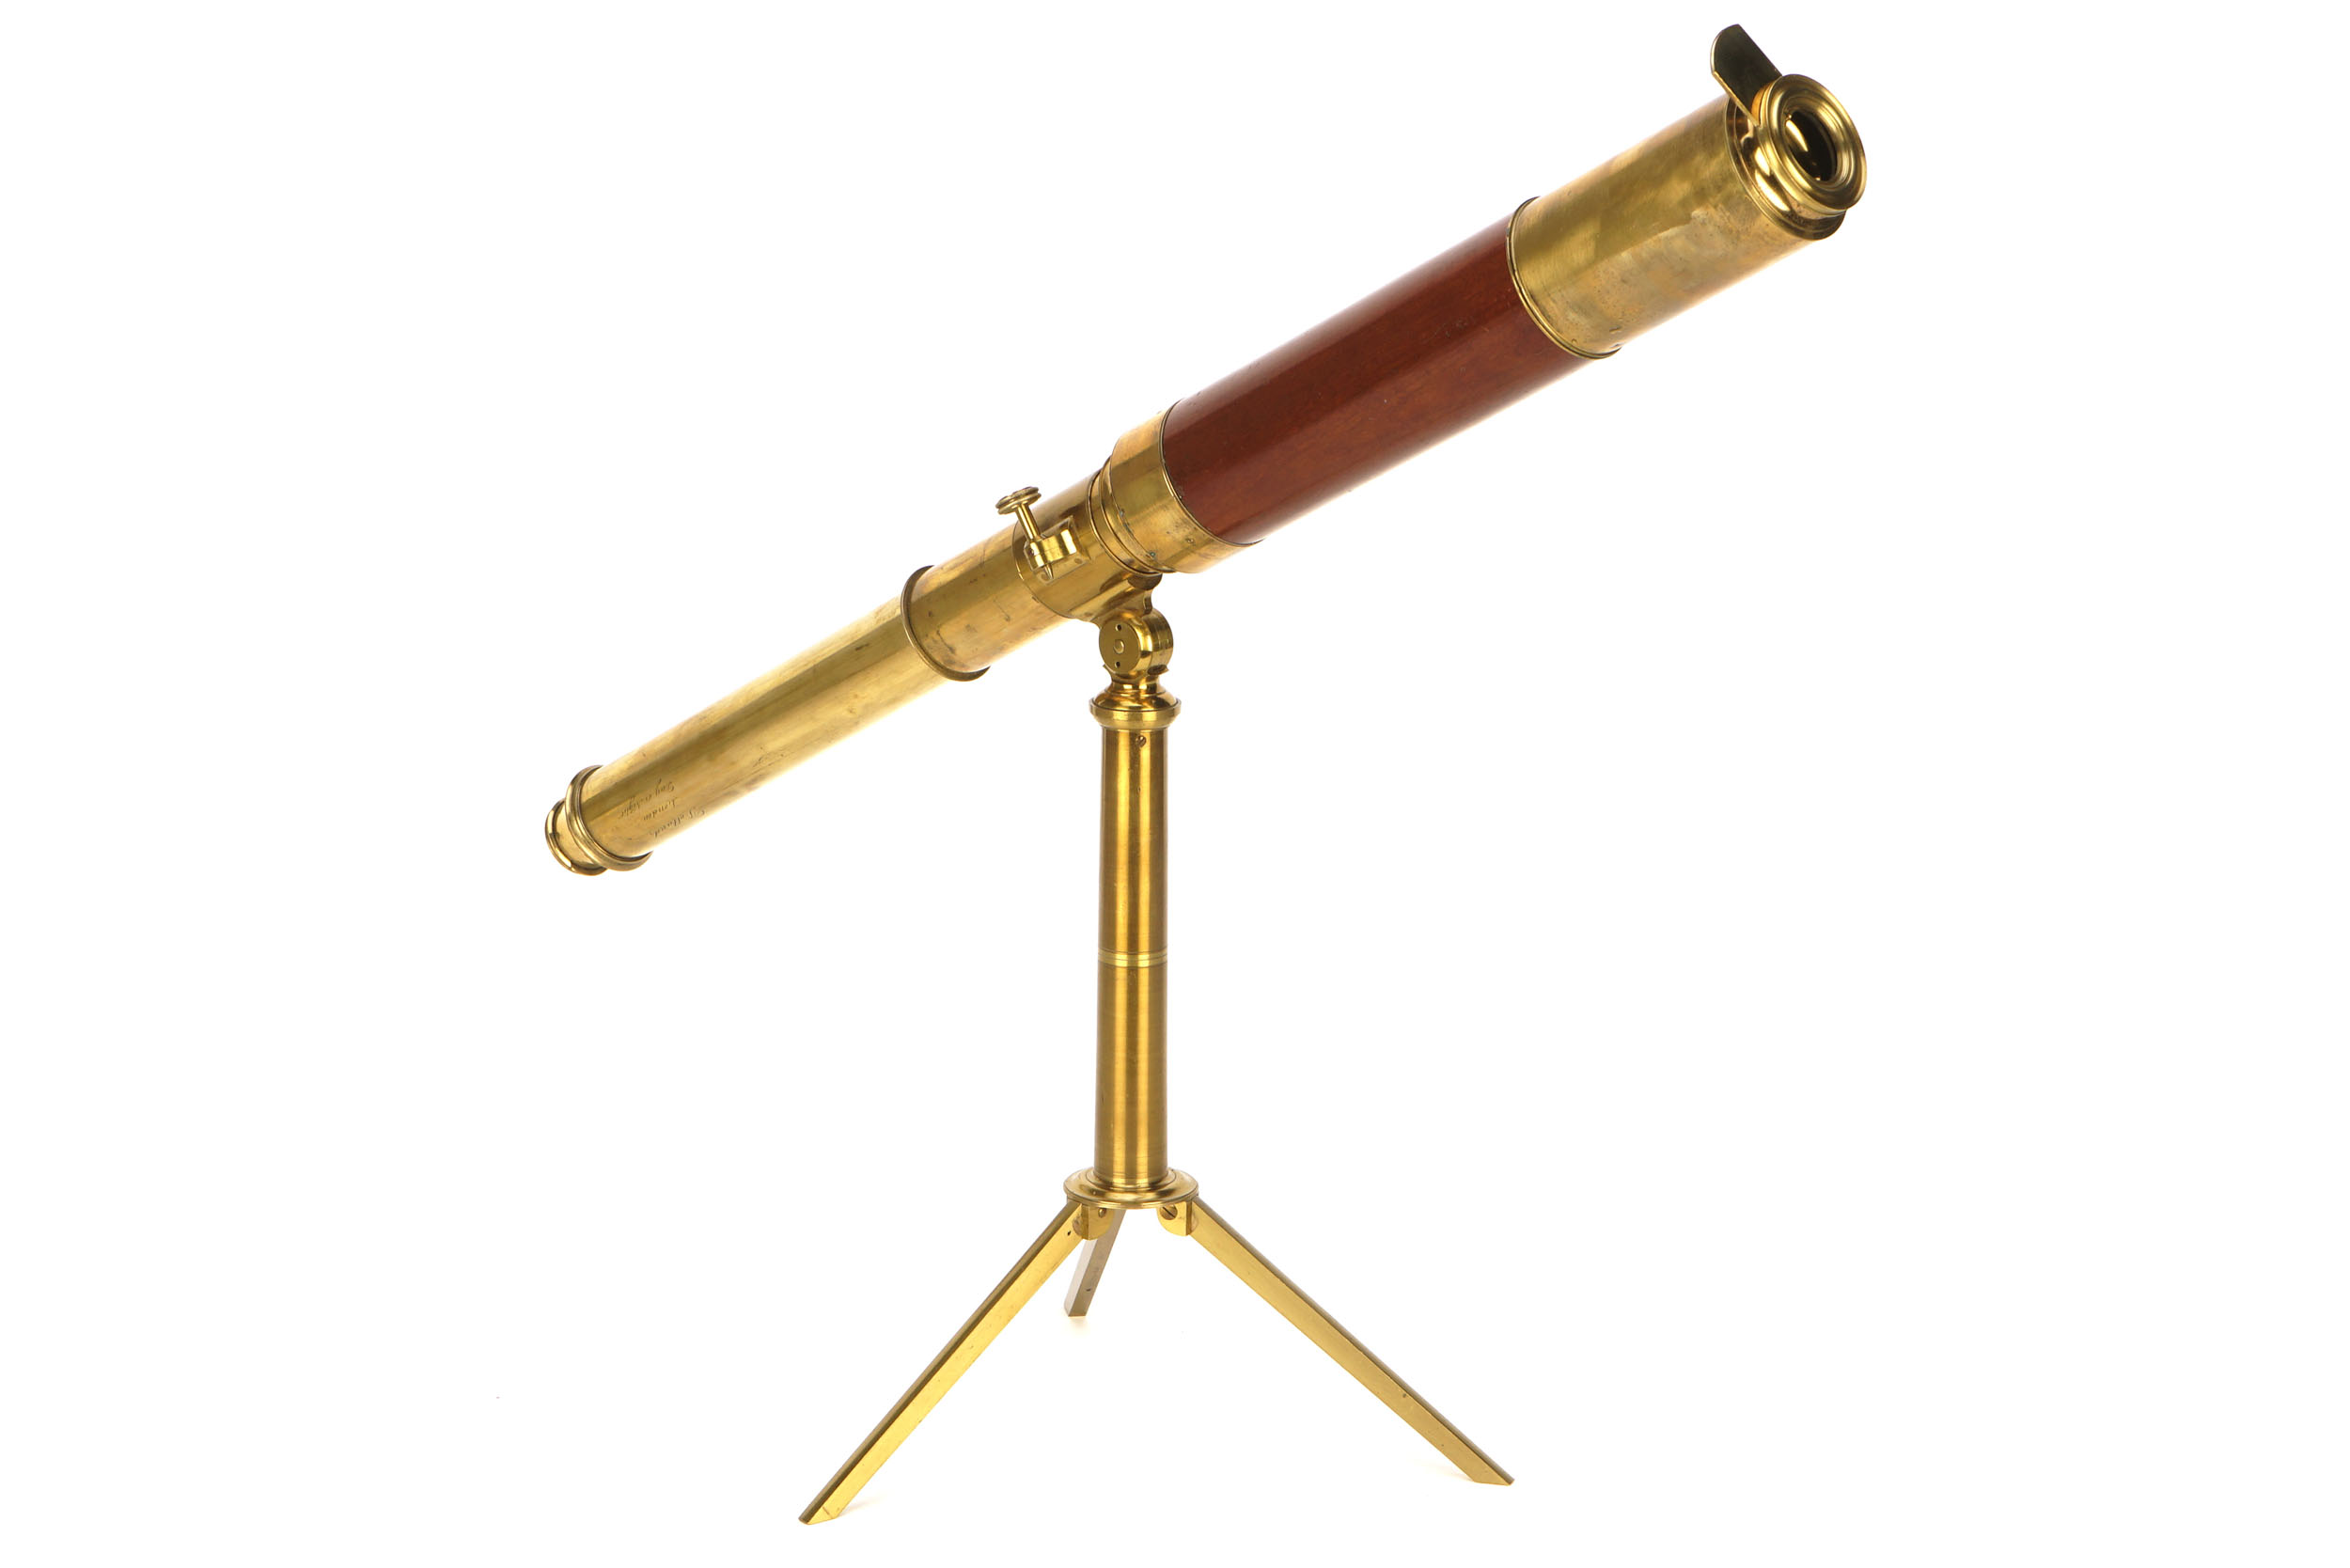 A Marine Telescope by Dolland, - Image 2 of 2